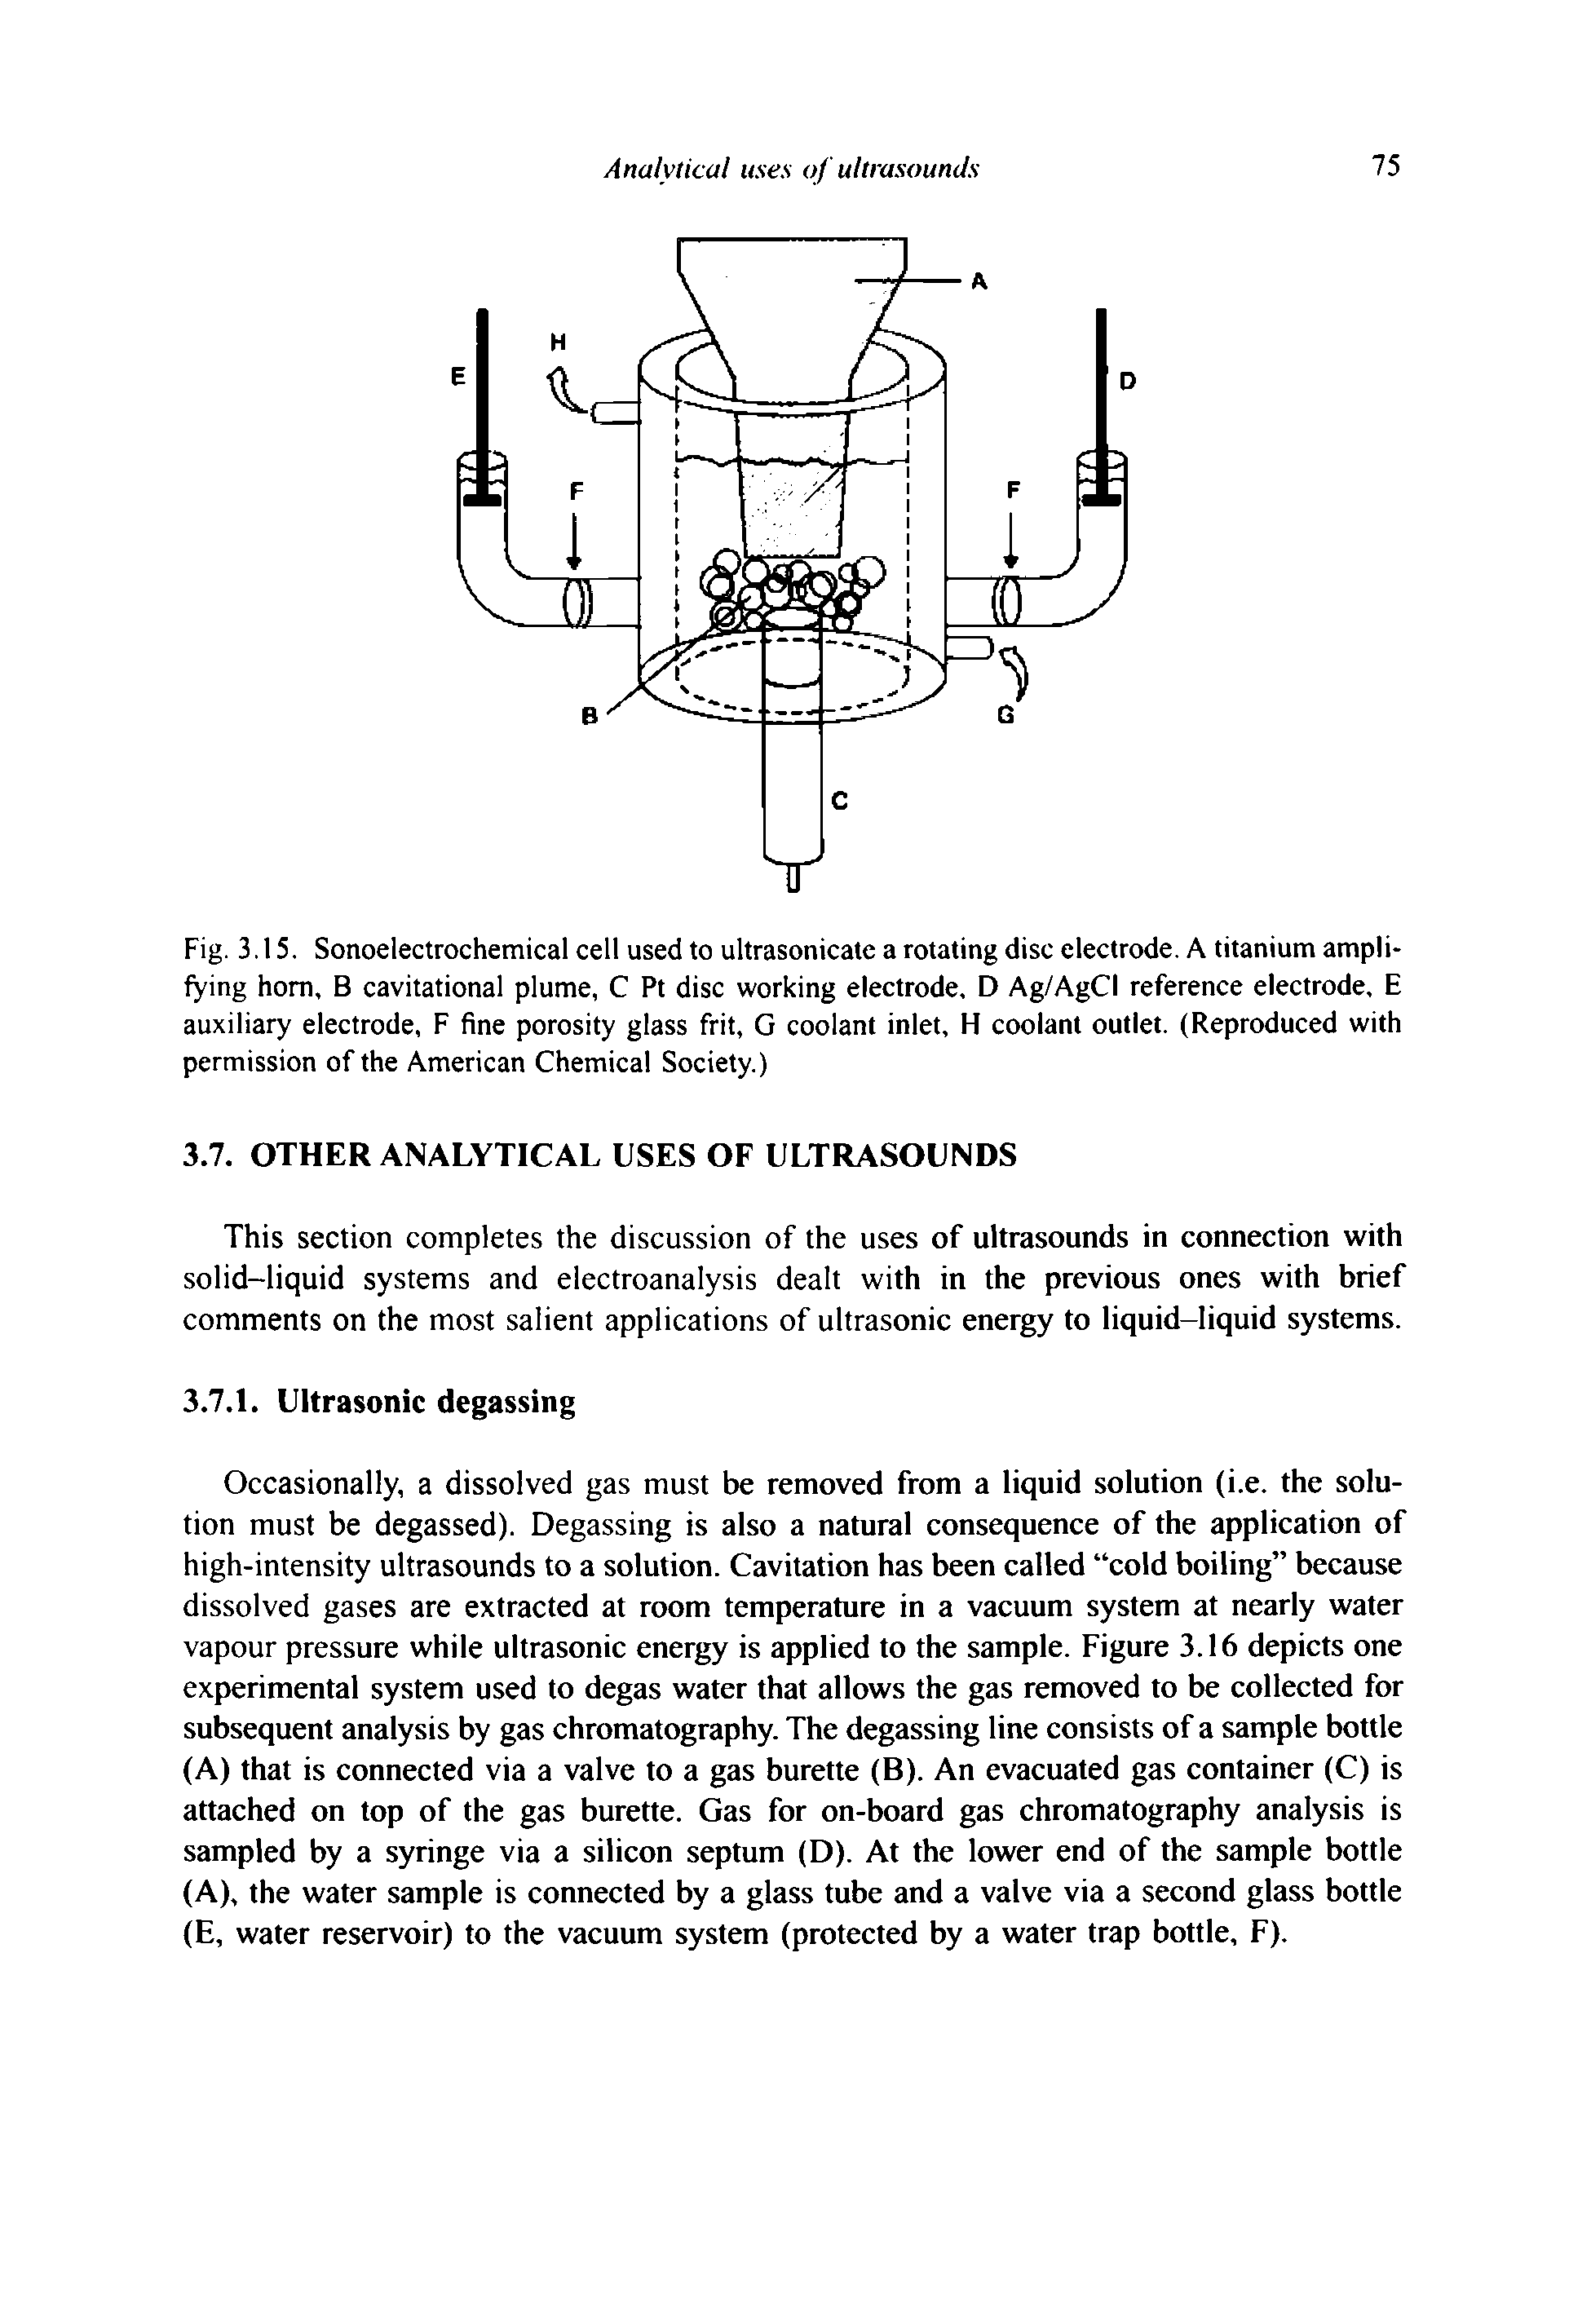 Fig. 3.15. Sonoelectrochemical cell used to ultrasonicate a rotating disc electrode. A titanium amplifying horn, B cavitational plume, C Pt disc working electrode, D Ag/AgCI reference electrode, E auxiliary electrode, F fine porosity glass frit, G coolant inlet, H coolant outlet. (Reproduced with permission of the American Chemical Society.)...